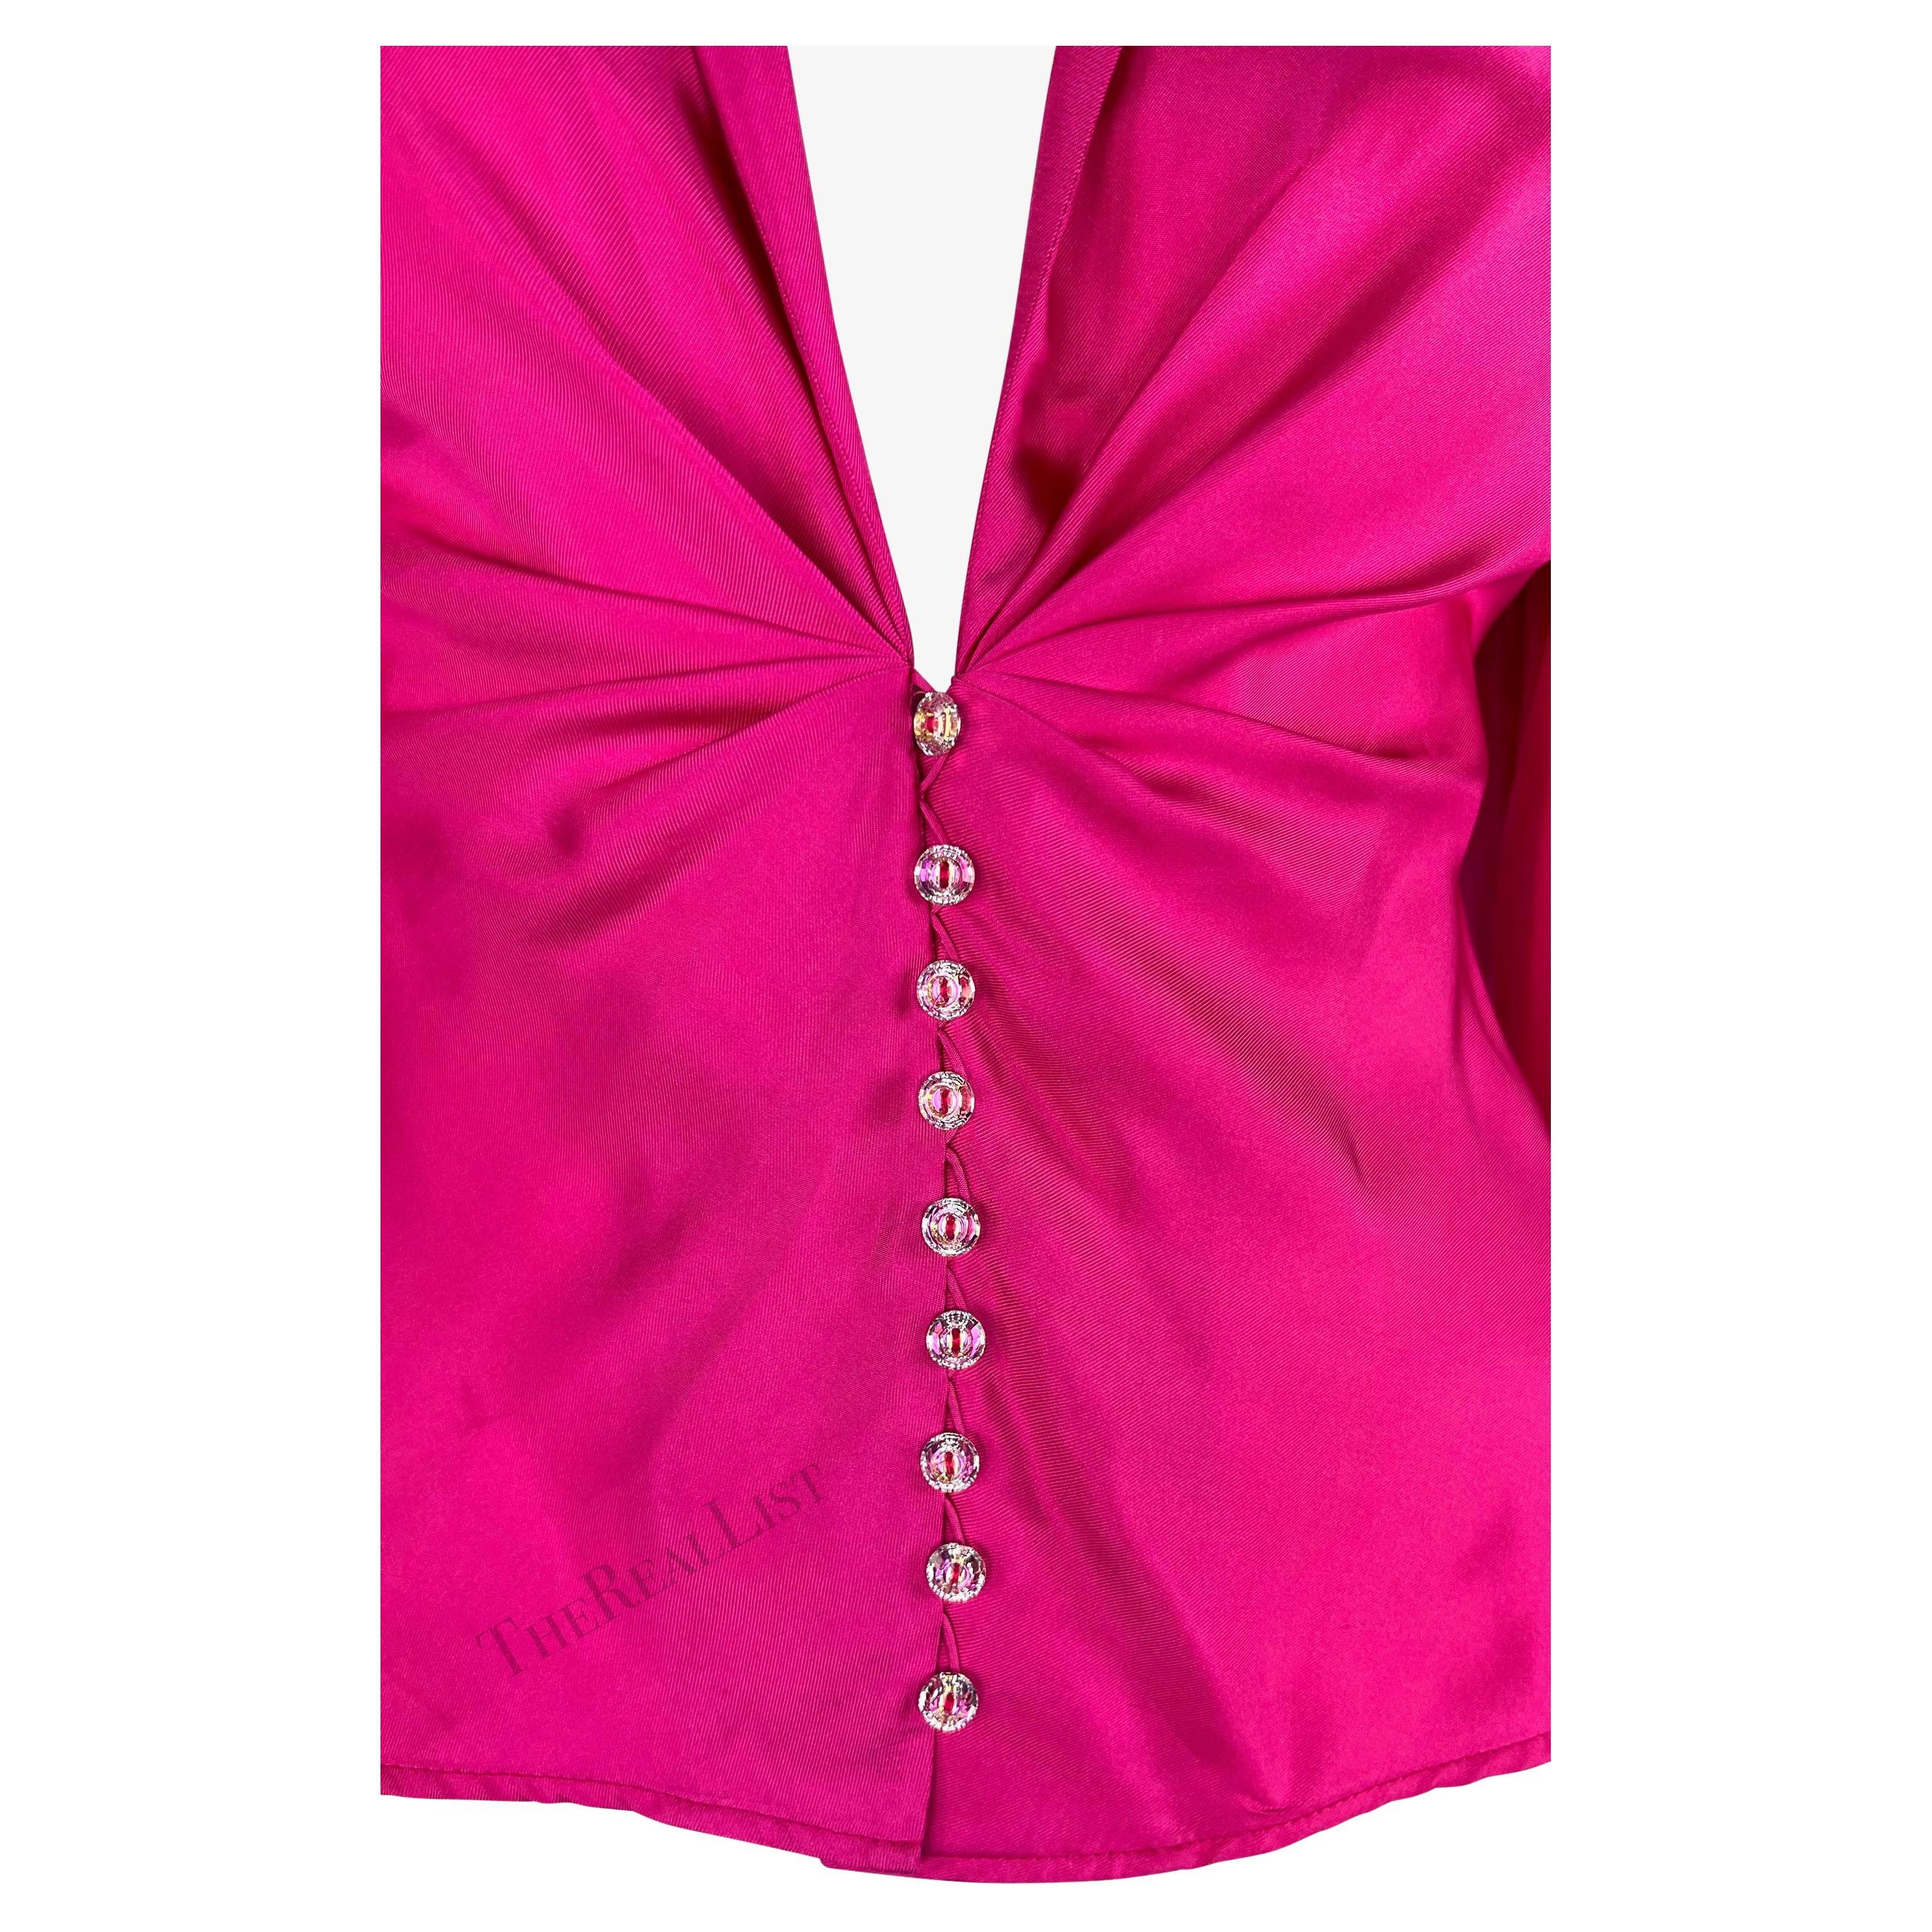 S/S 2000 Gianni Versace by Donatella Runway Hot Pink Silk Satin Rhinestone Top In Good Condition For Sale In West Hollywood, CA